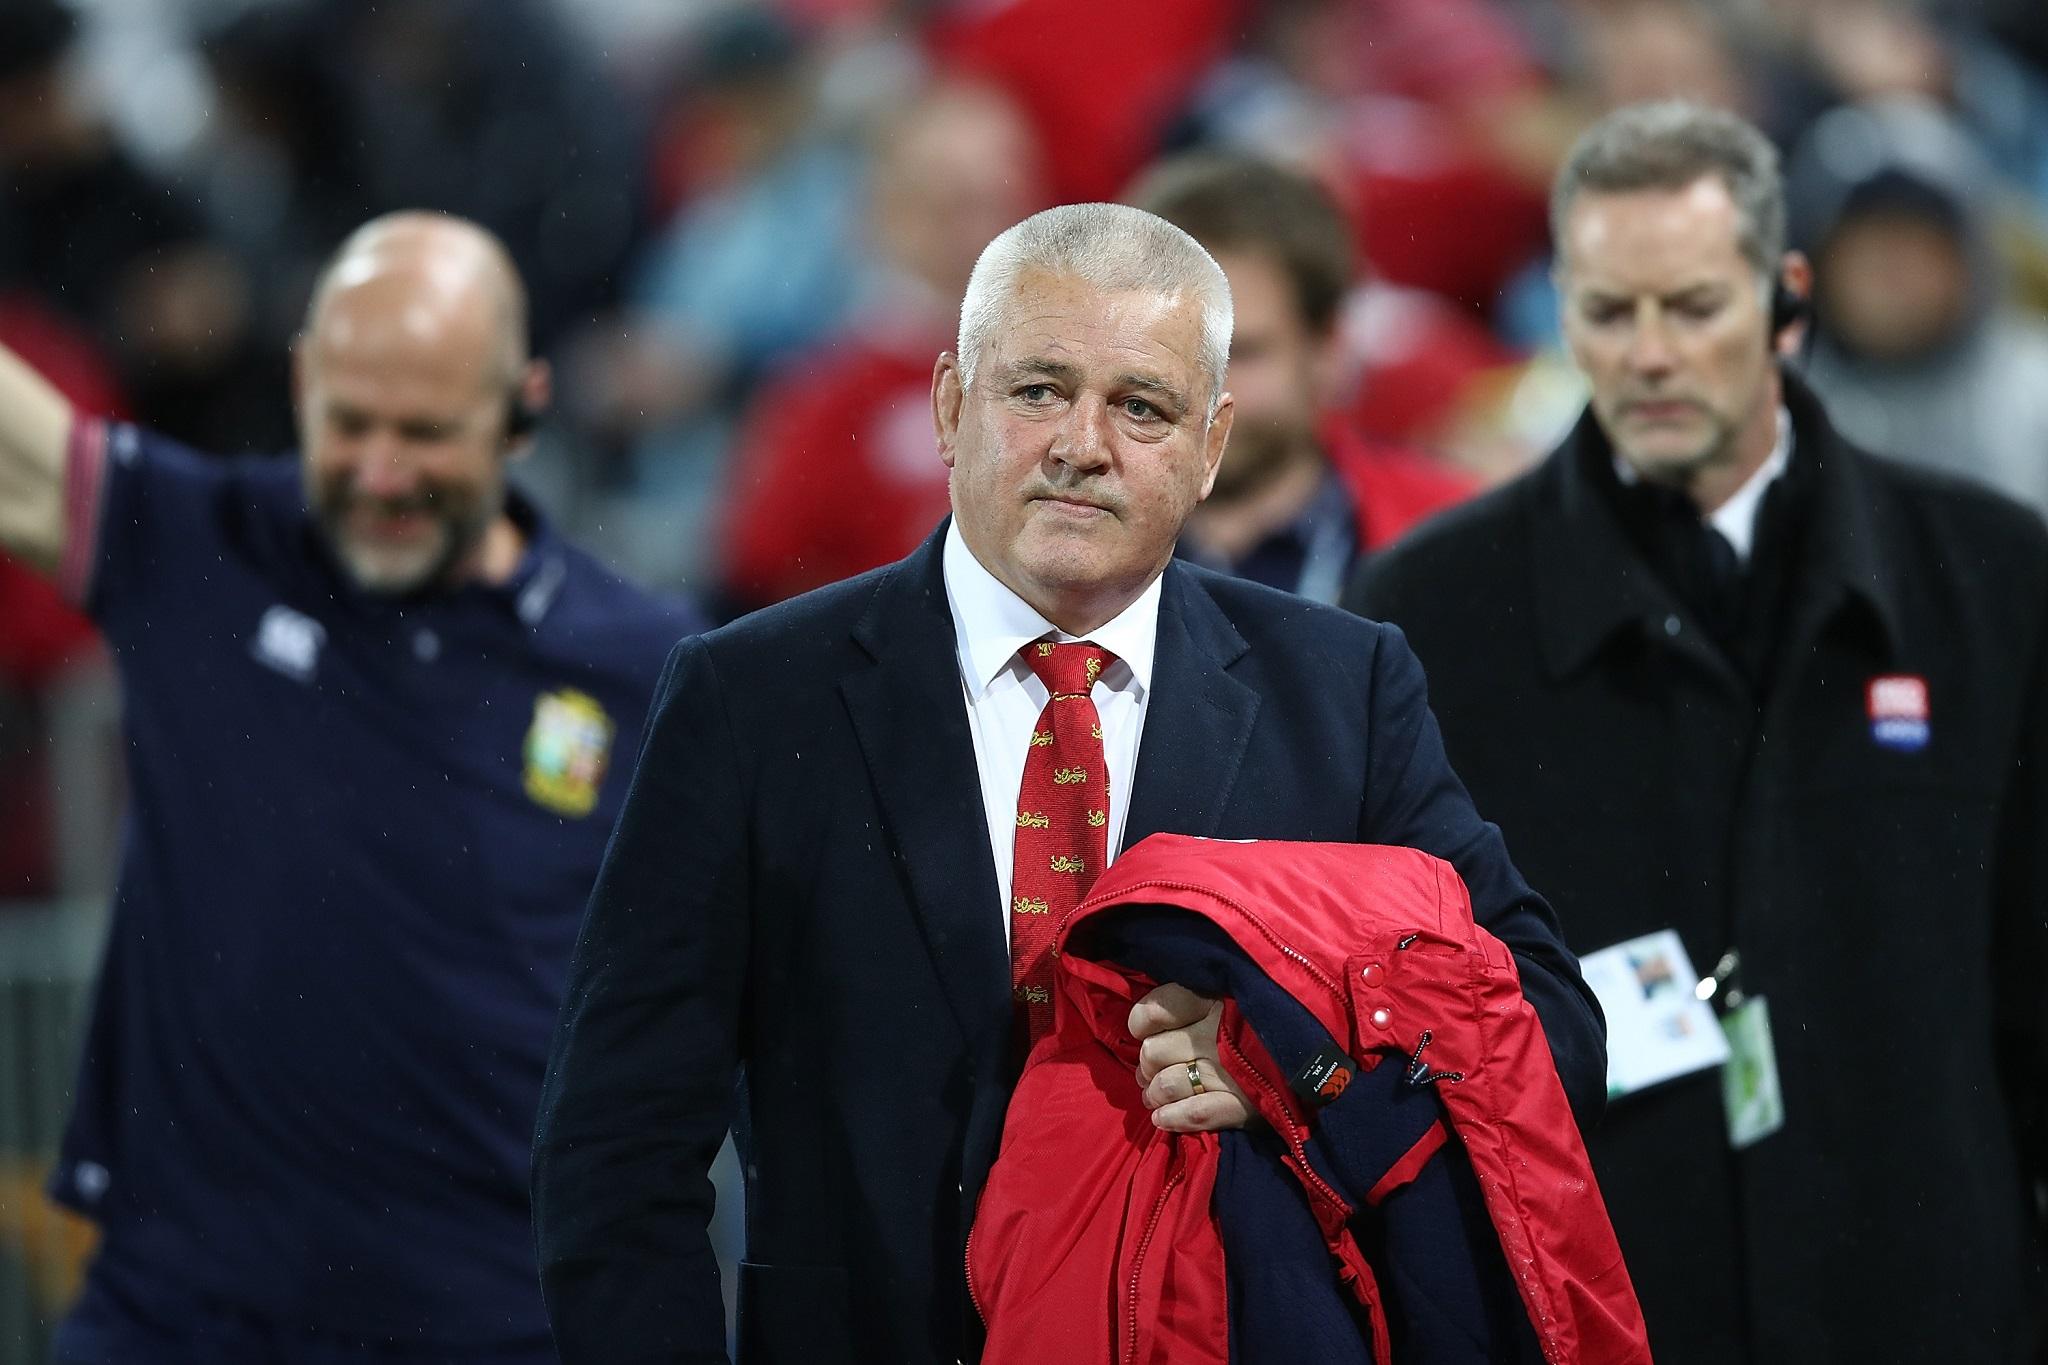 Warren Gatland believes his Lions side were galvanised by the personal attacks launched at him